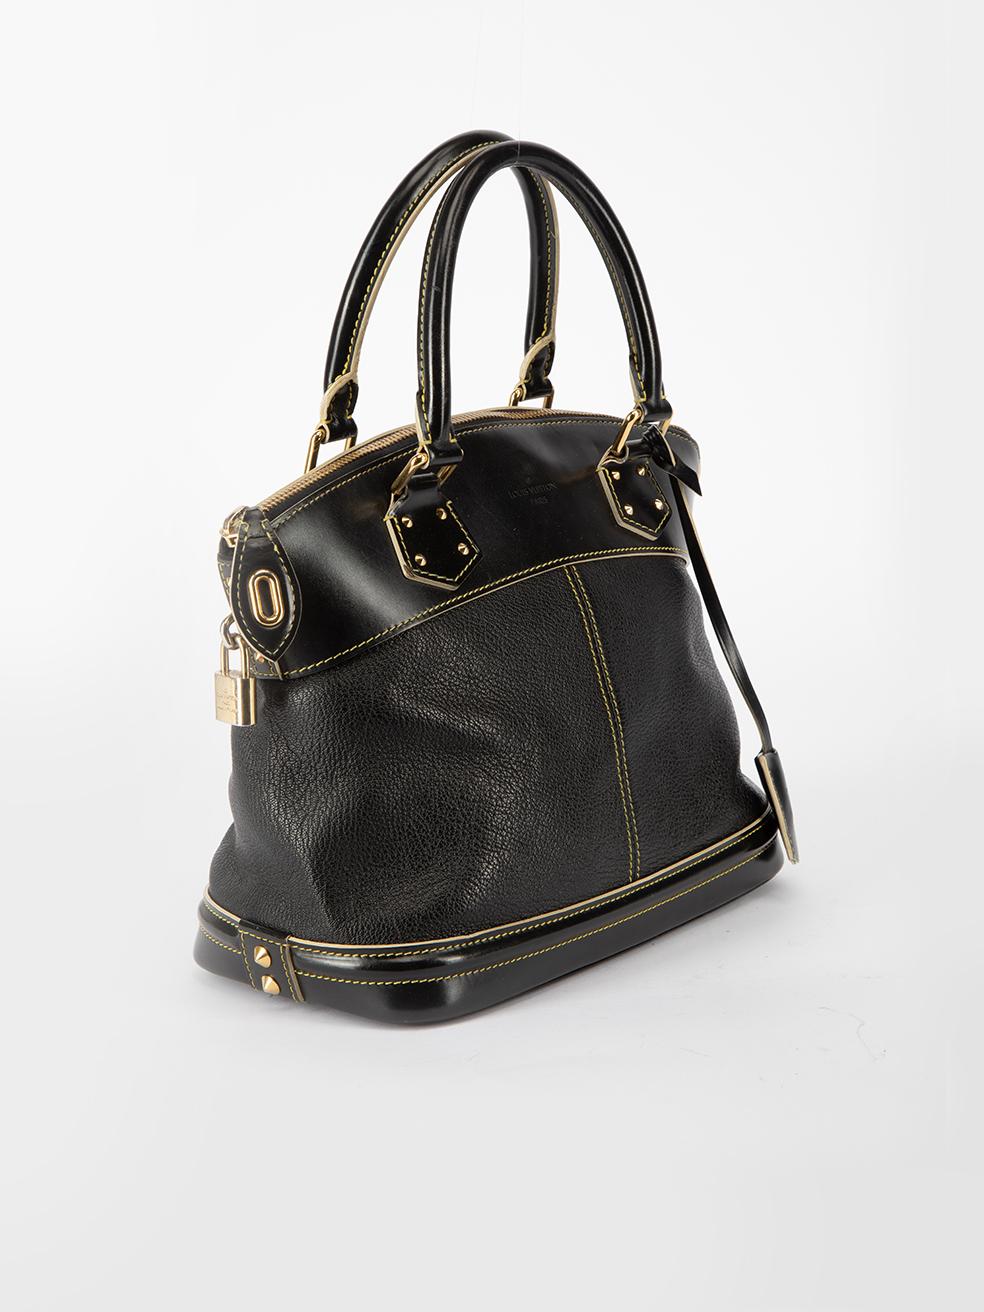 CONDITION is Very good. Minimal wear to bag is evident. Minimal wear to the leather exterior which has naturally folded from use and scuffs can be seen. There is also minimal wear to the interior and gold hardware of this used Louis Vuitton designer